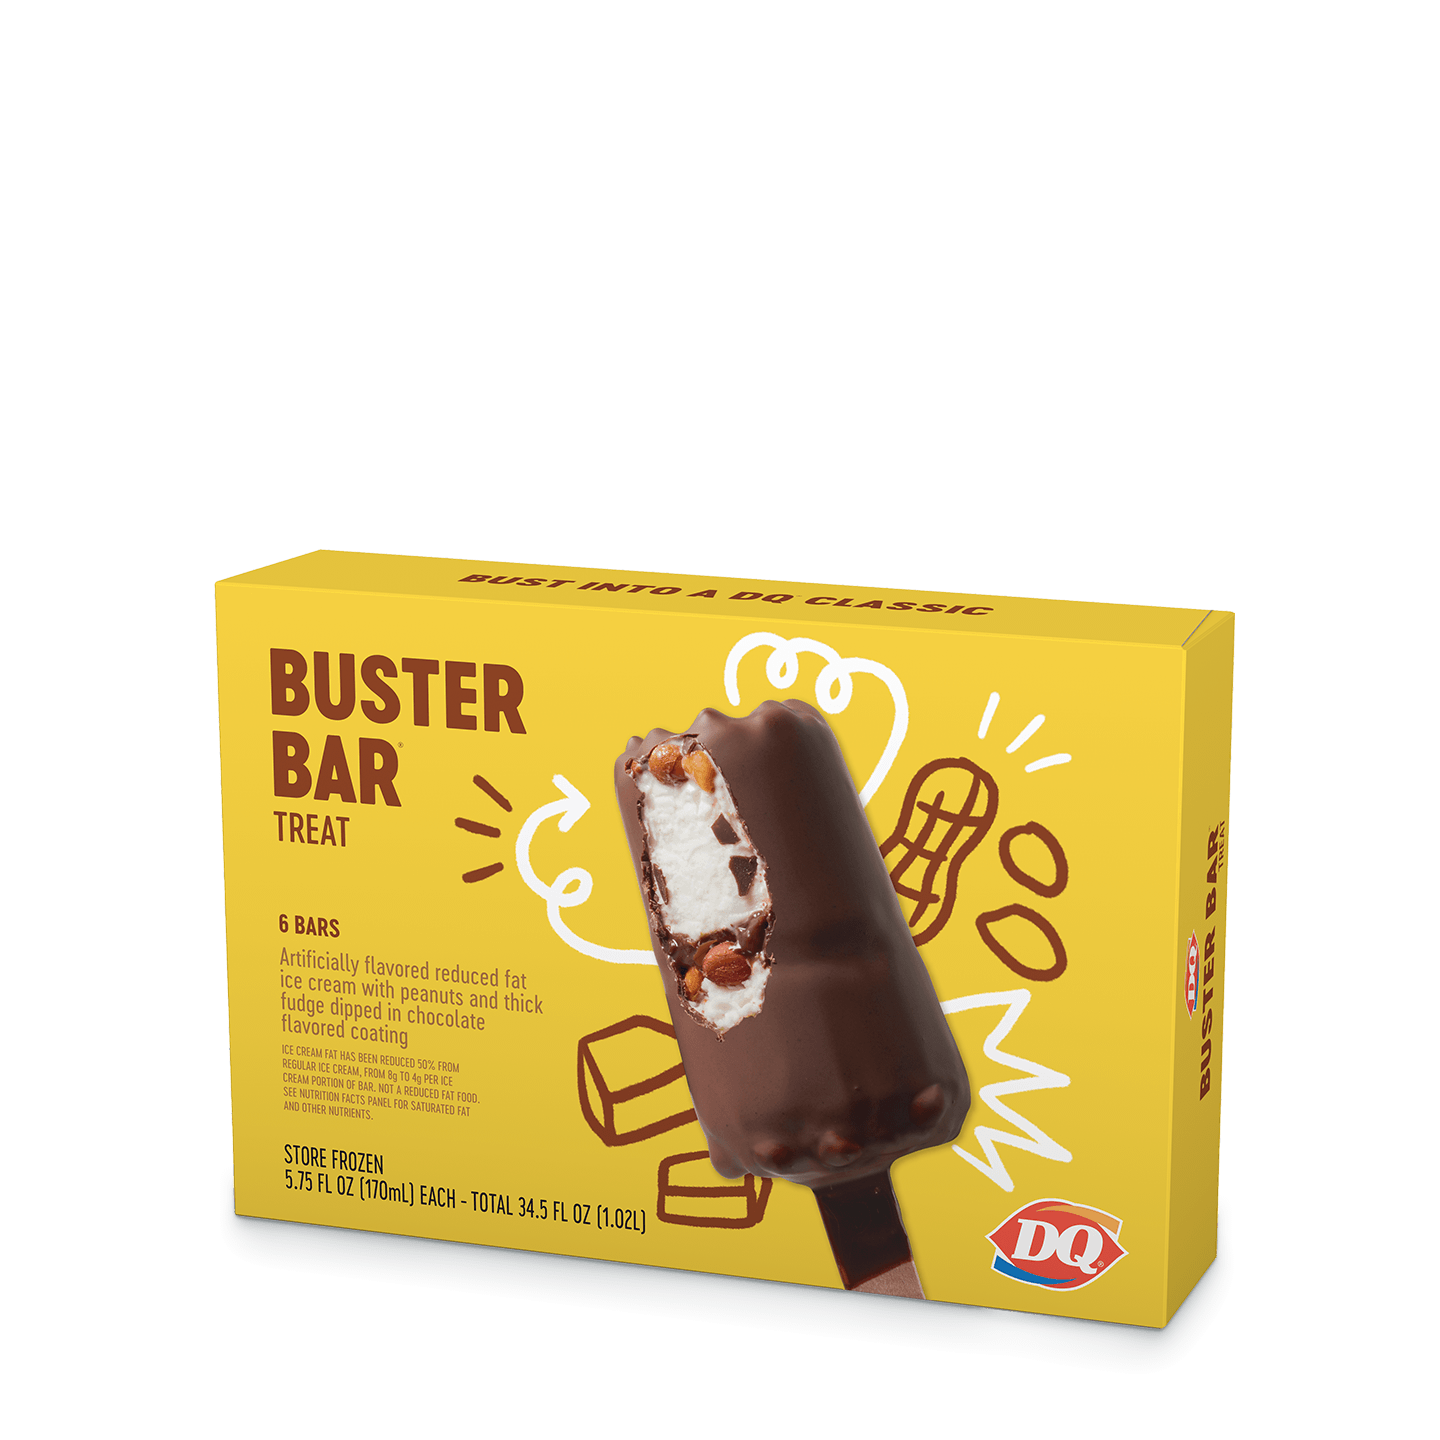 calories in a buster bar from dq